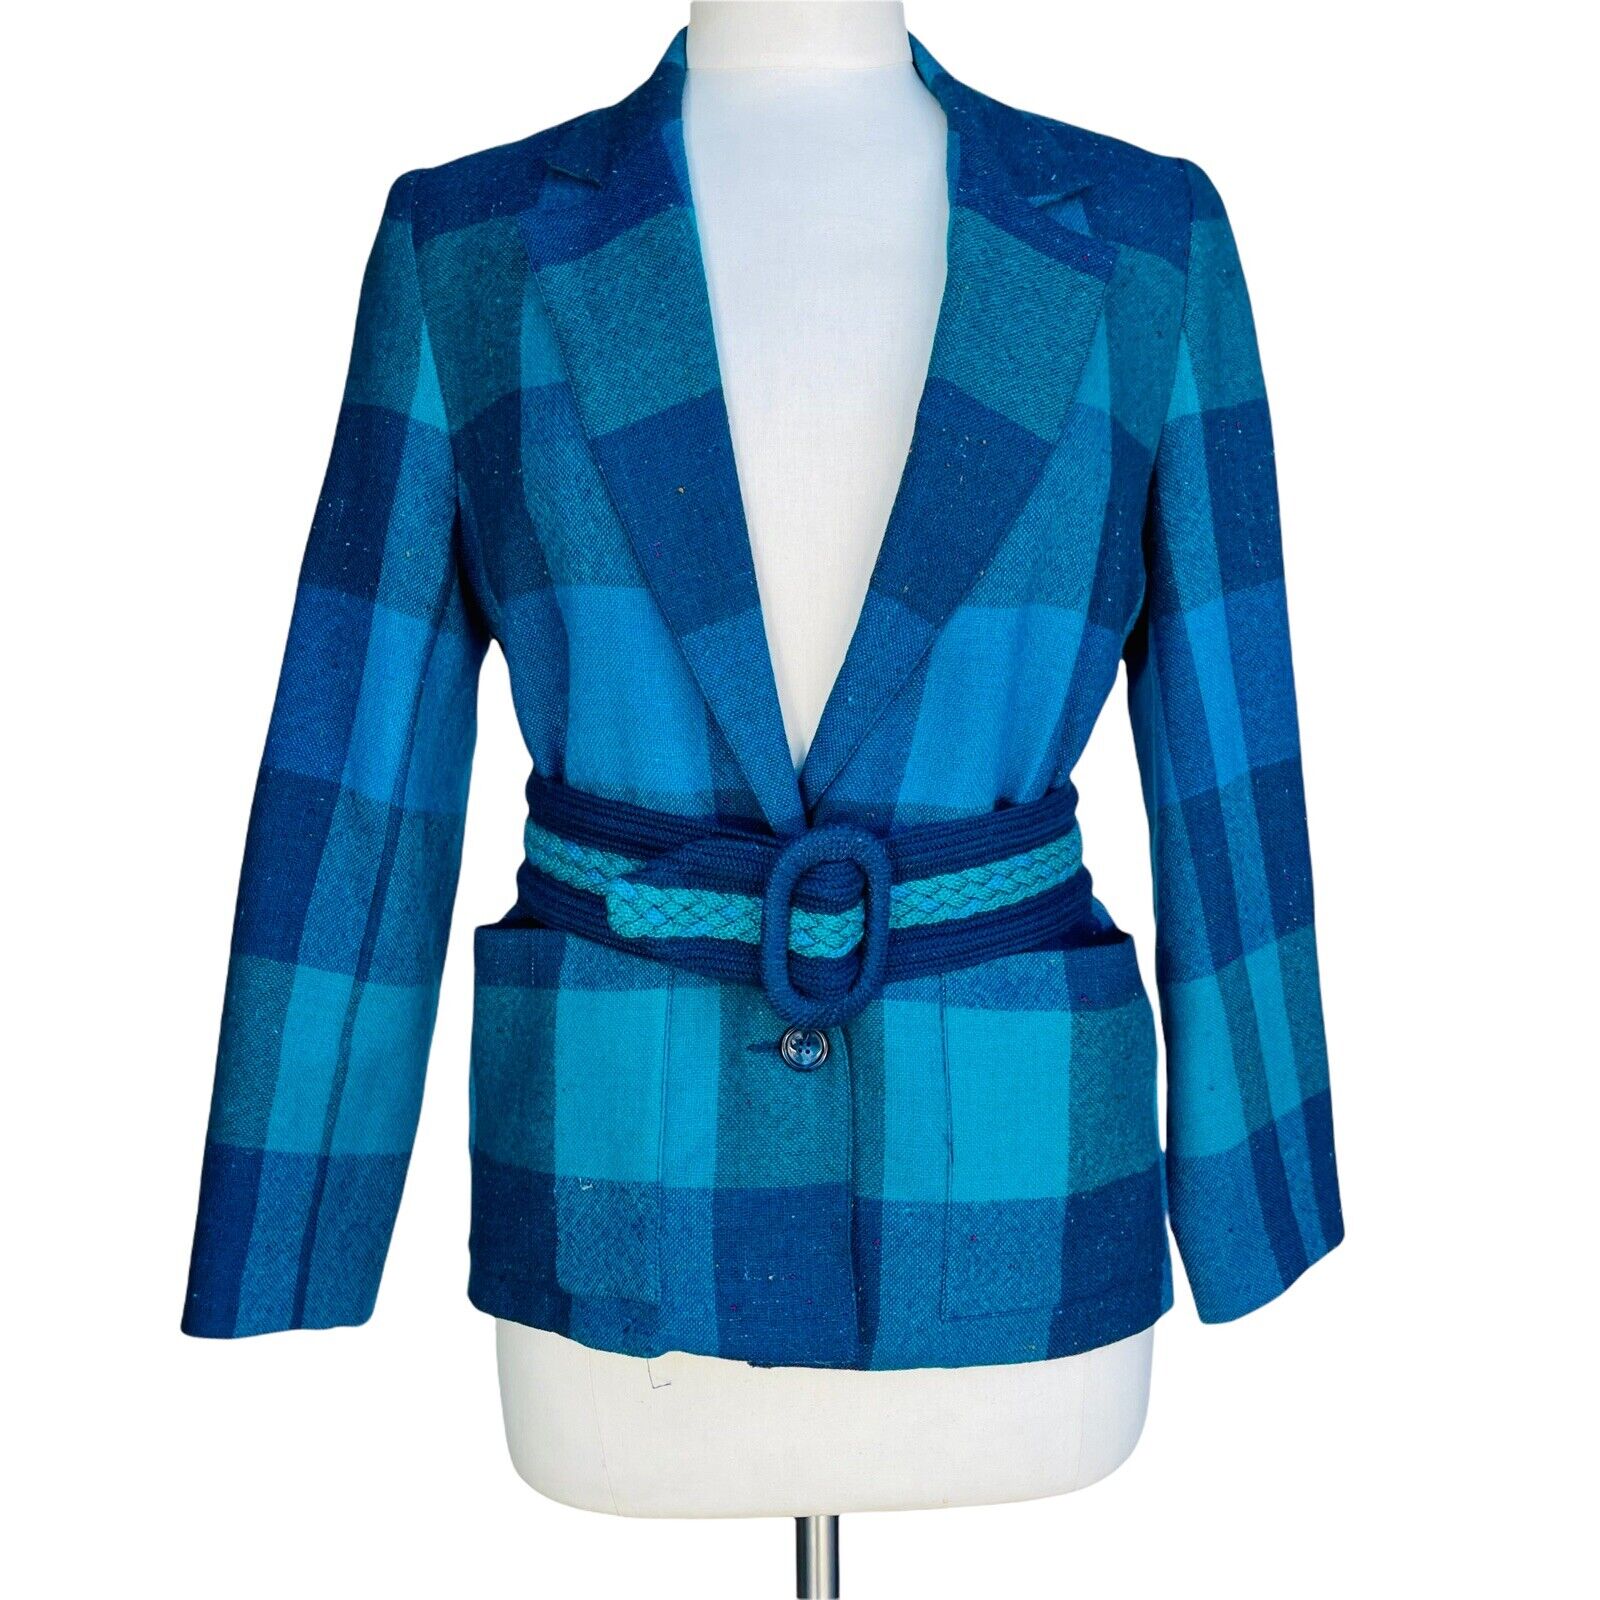 Vintage LORCH Plaid Pure Wool Blazer Women’s Size 4 Classic Pocket Belted